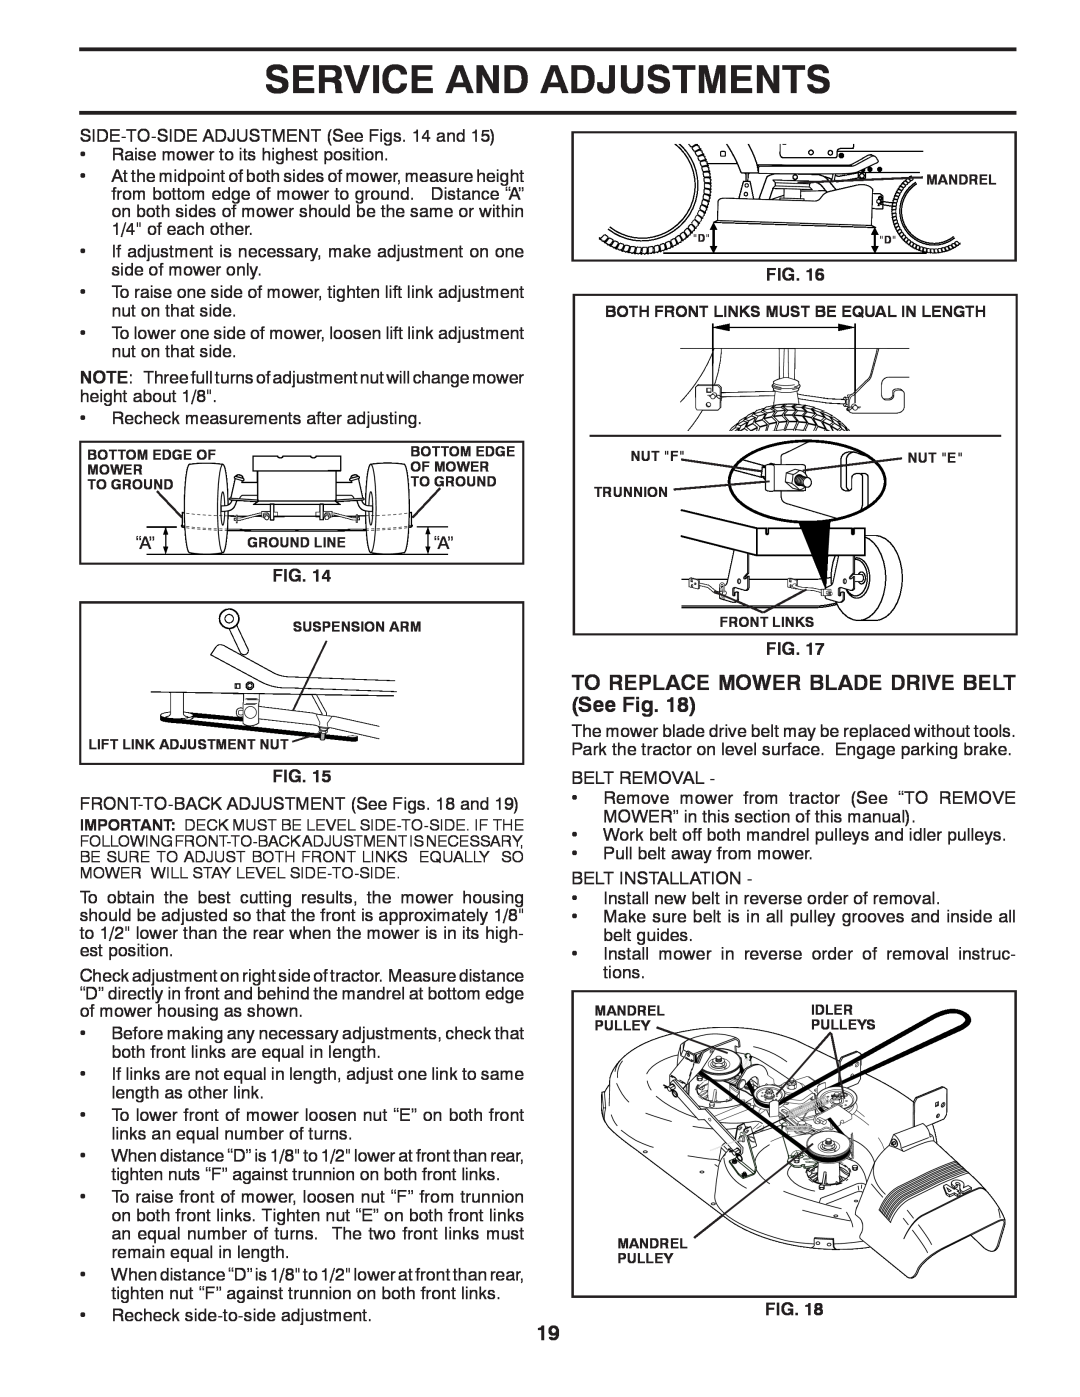 Poulan PO175H42LT manual TO REPLACE MOWER BLADE DRIVE BELT See Fig, Service And Adjustments 